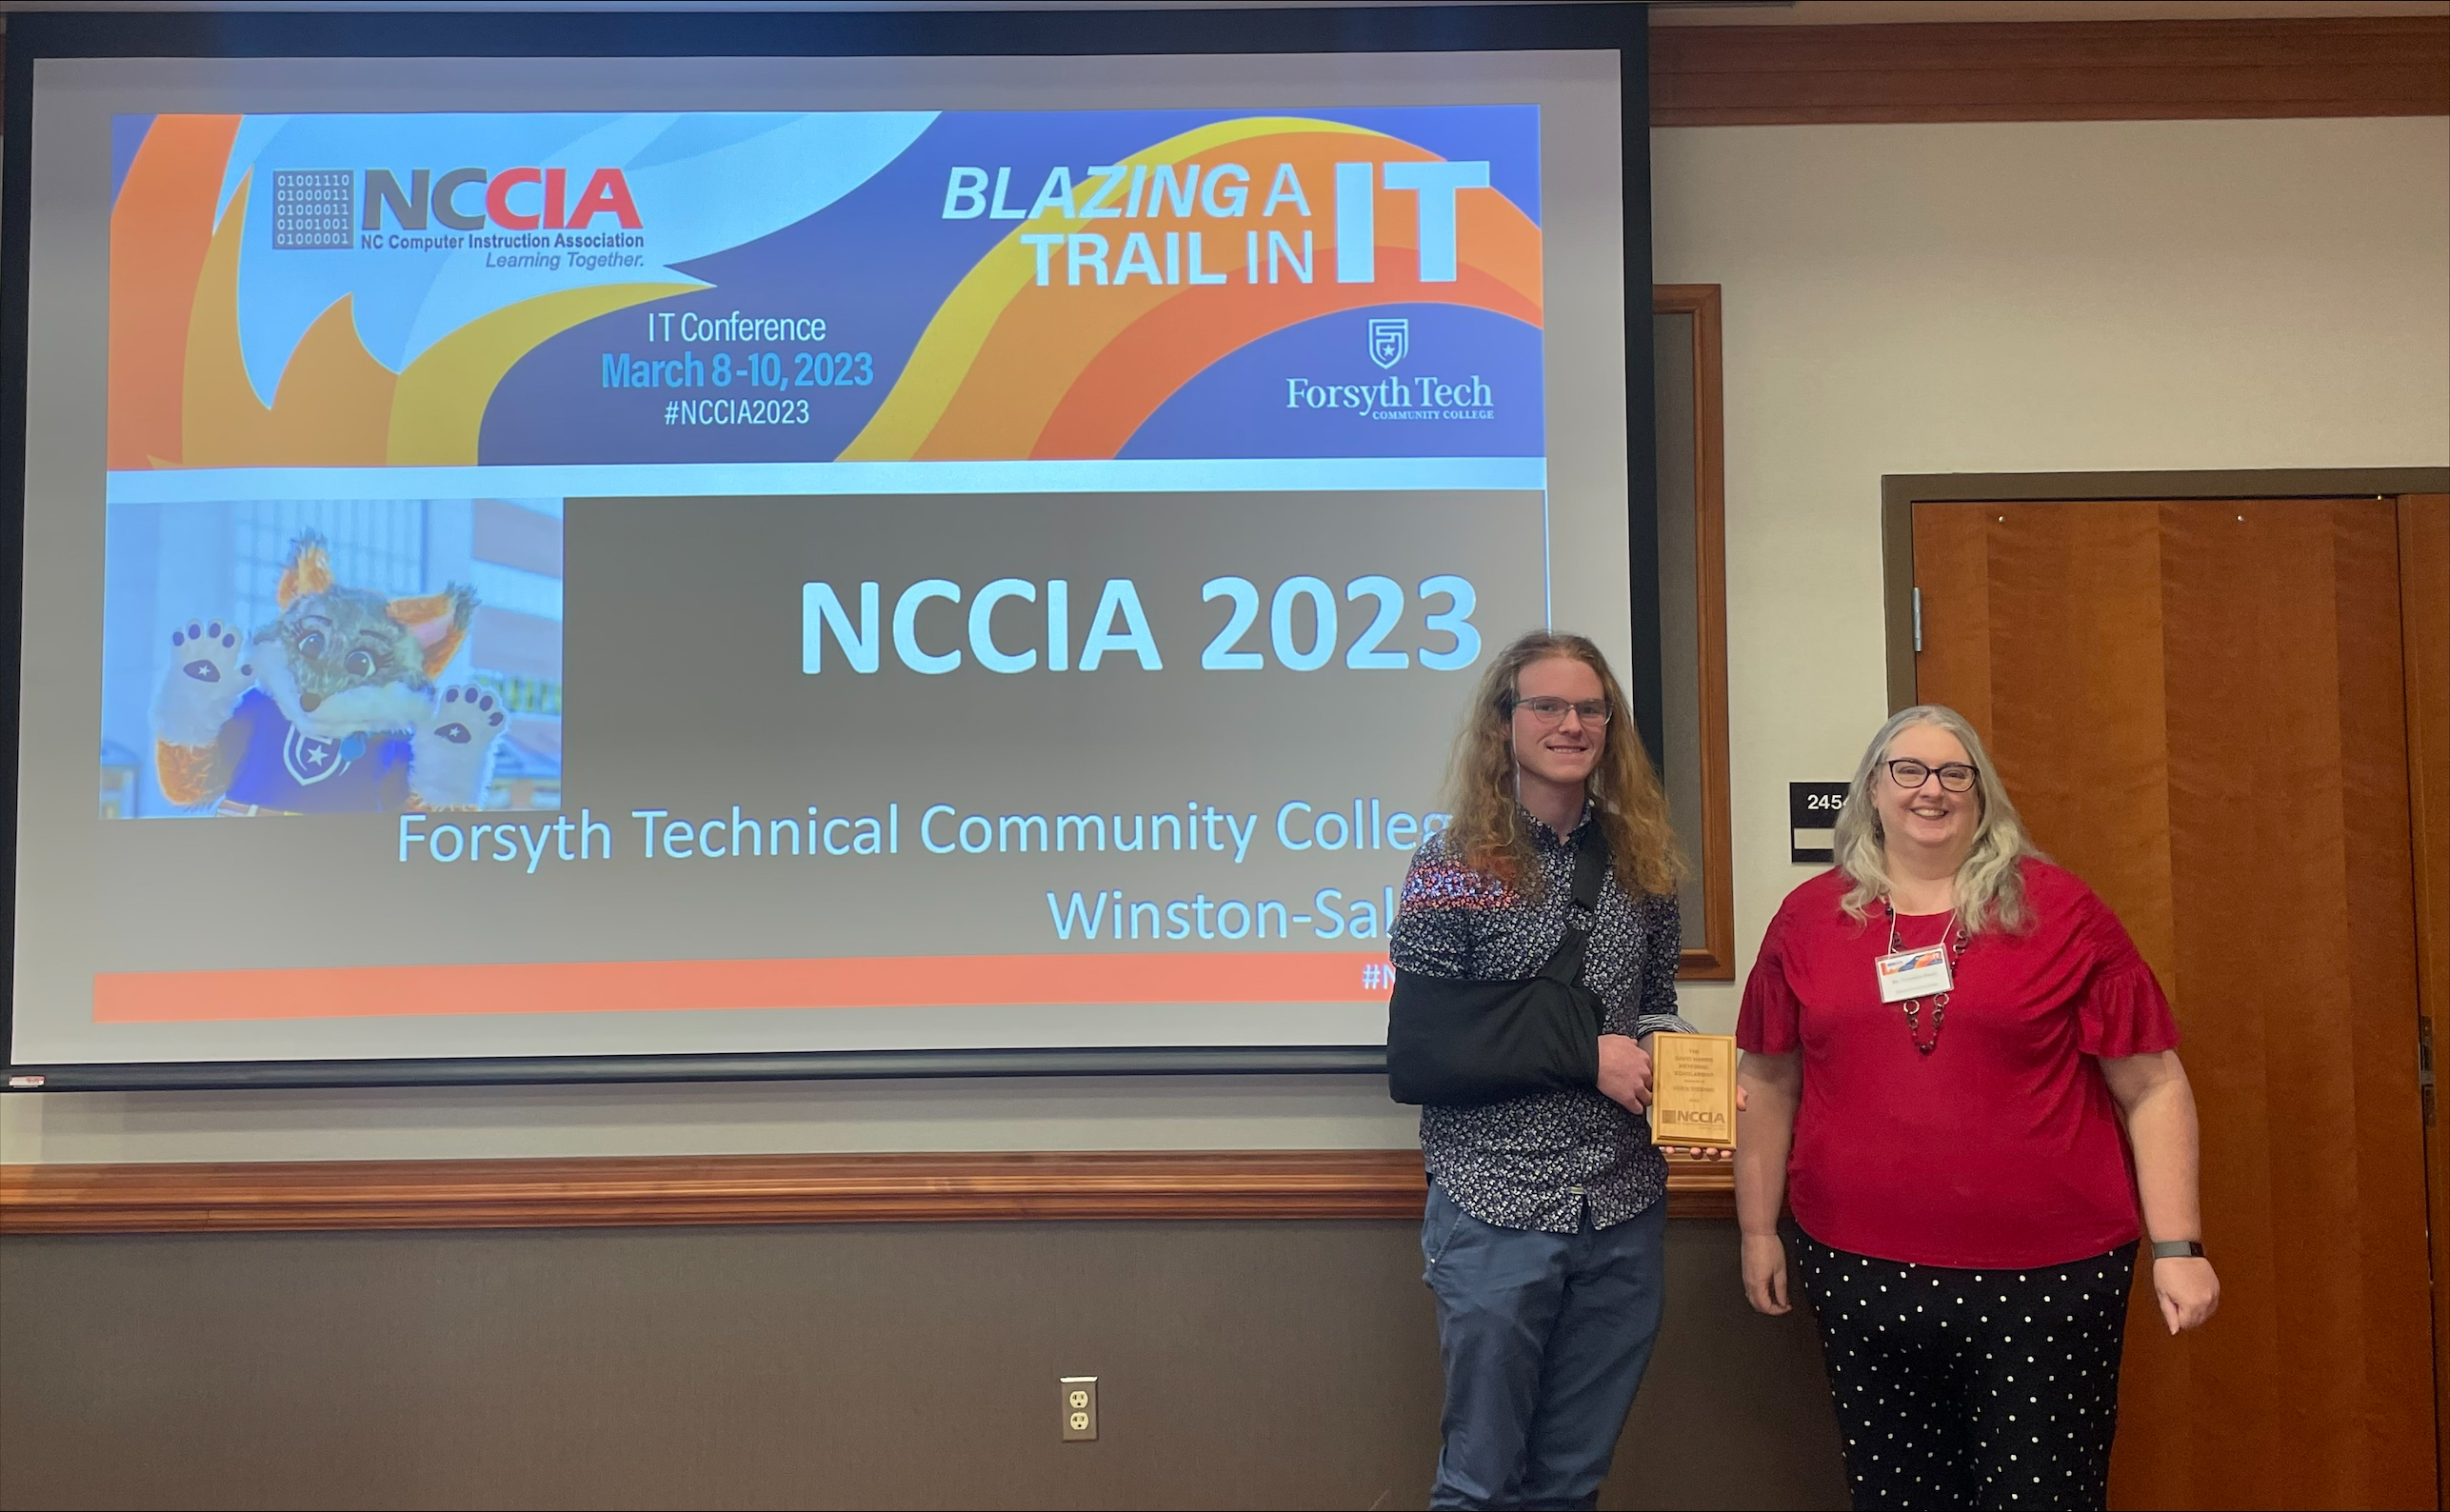 Aiden Sheenan with Veronica Dooley at NCCIA 2023 conference